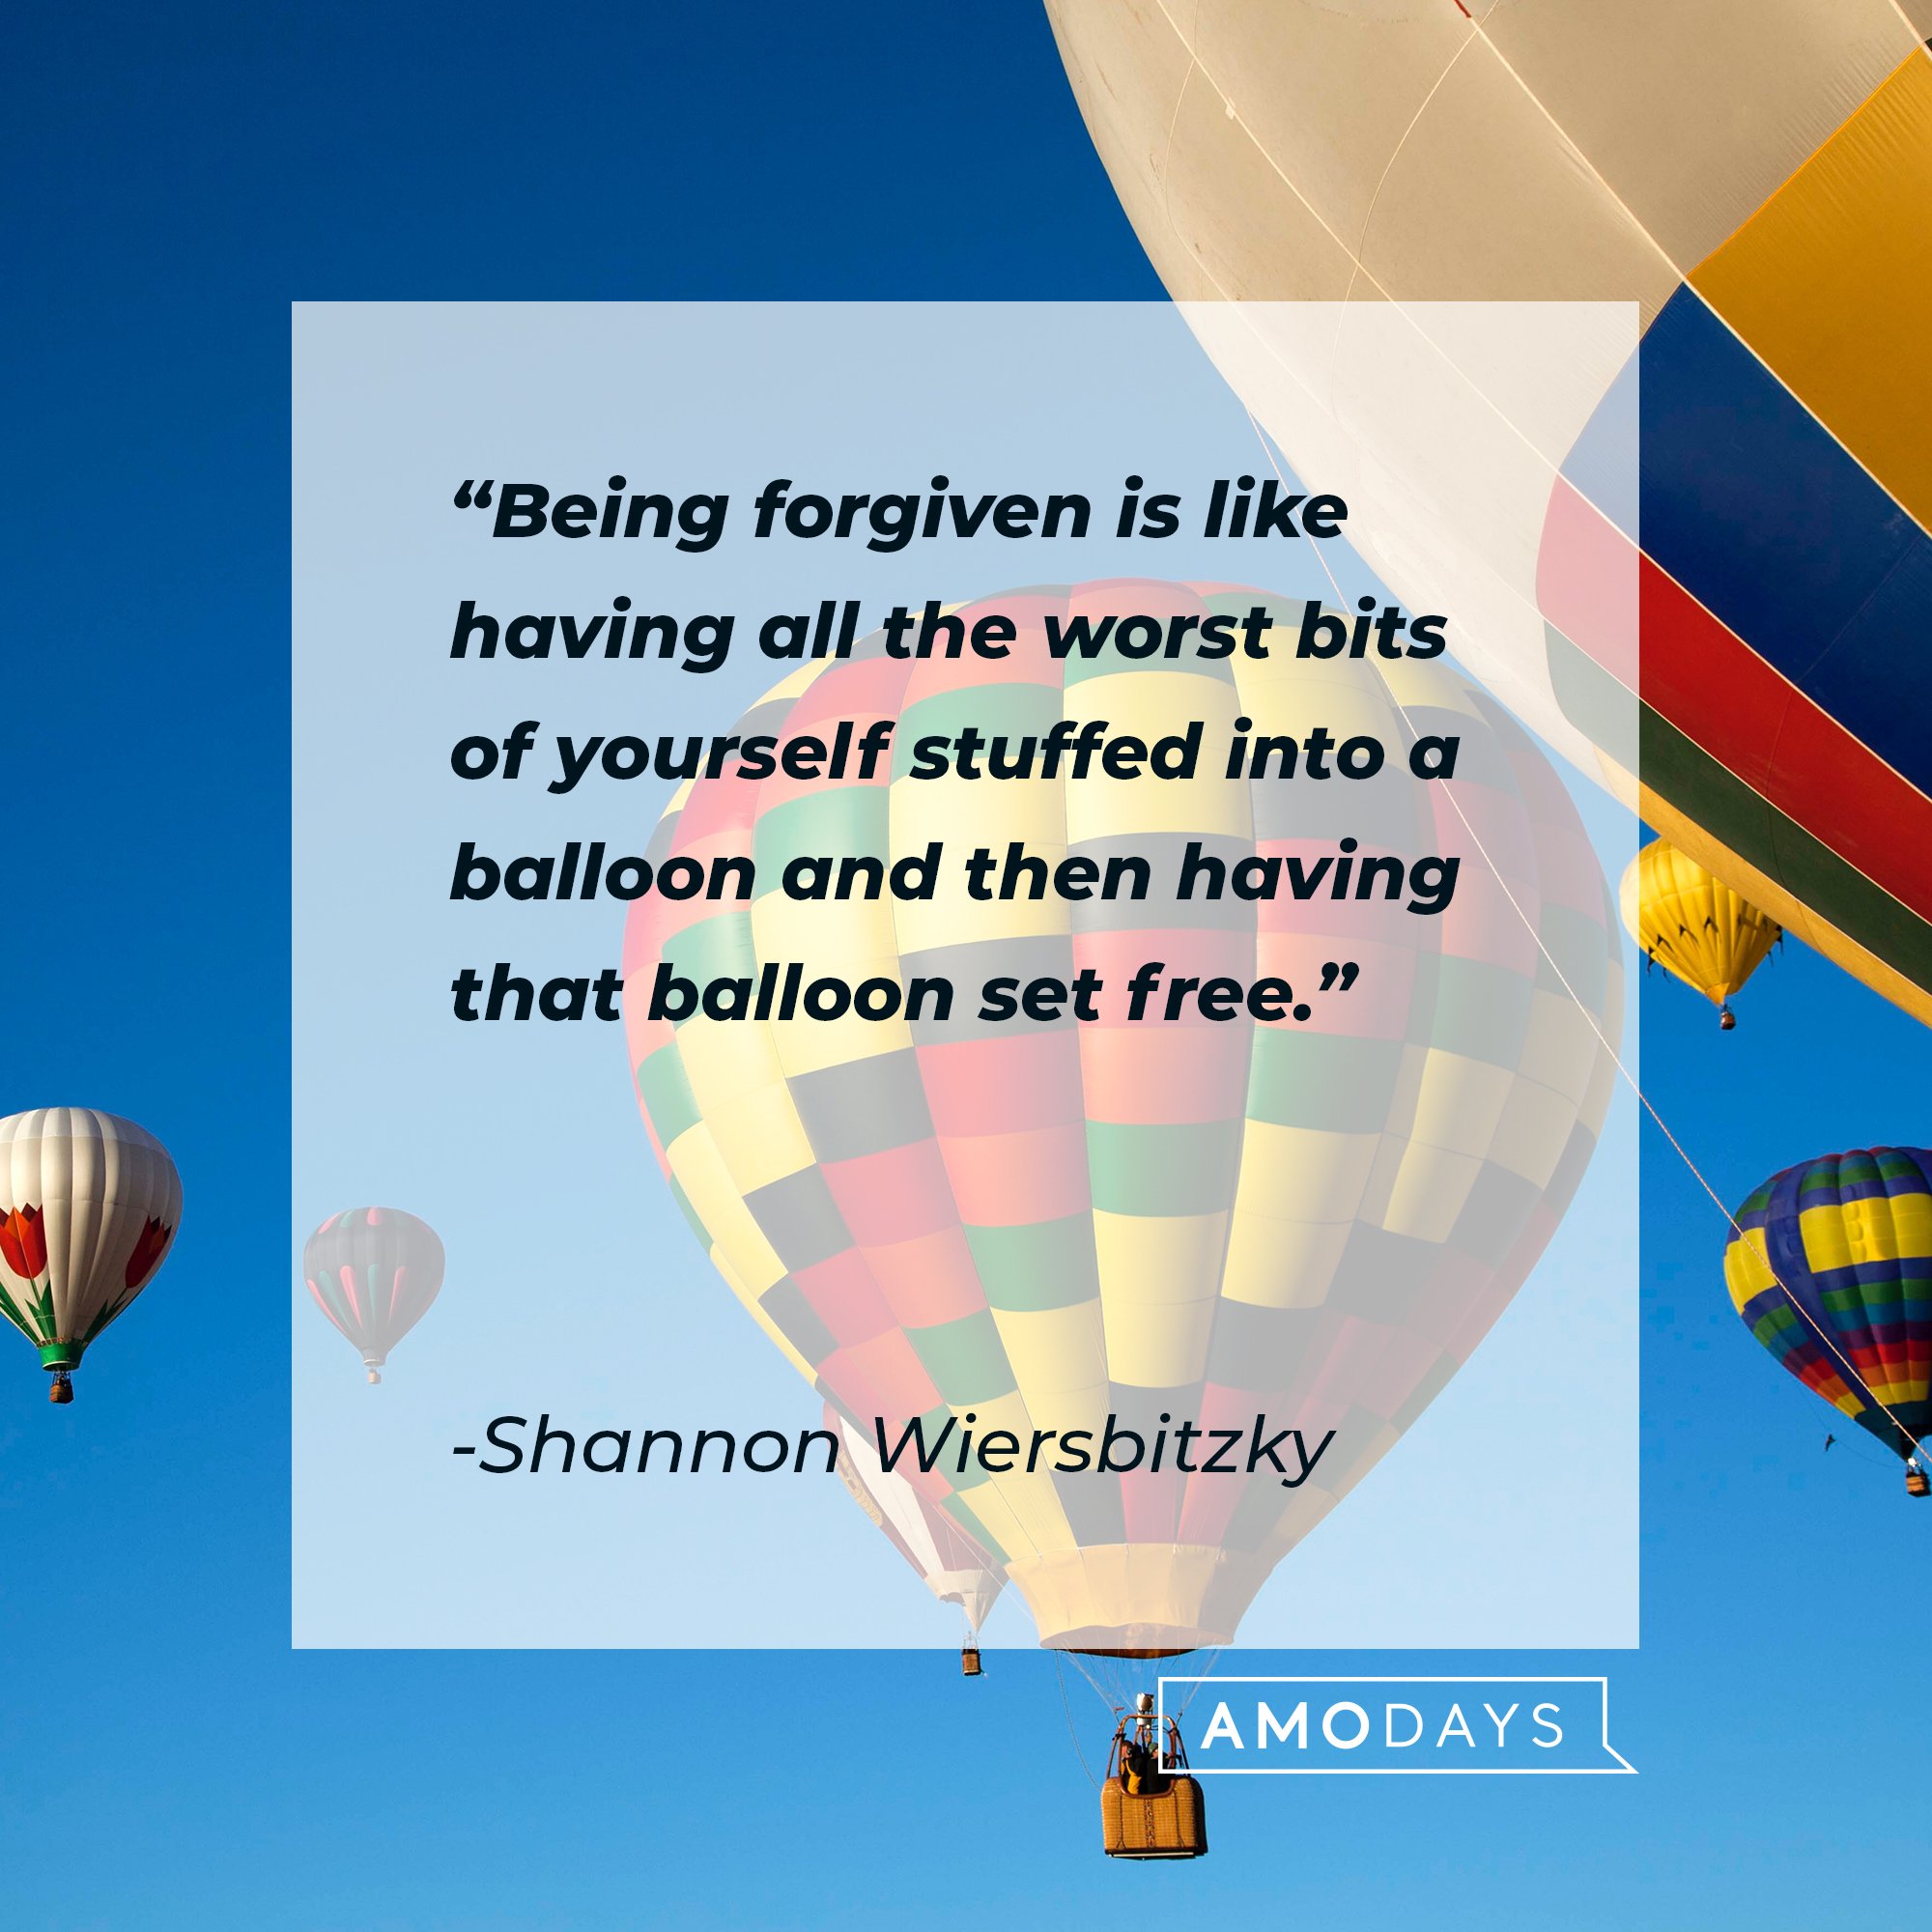 Shannon Wiersbitzky’s quote: "Being forgiven is like having all the worst bits of yourself stuffed into a balloon and then having that balloon set free." | Image: AmoDays 